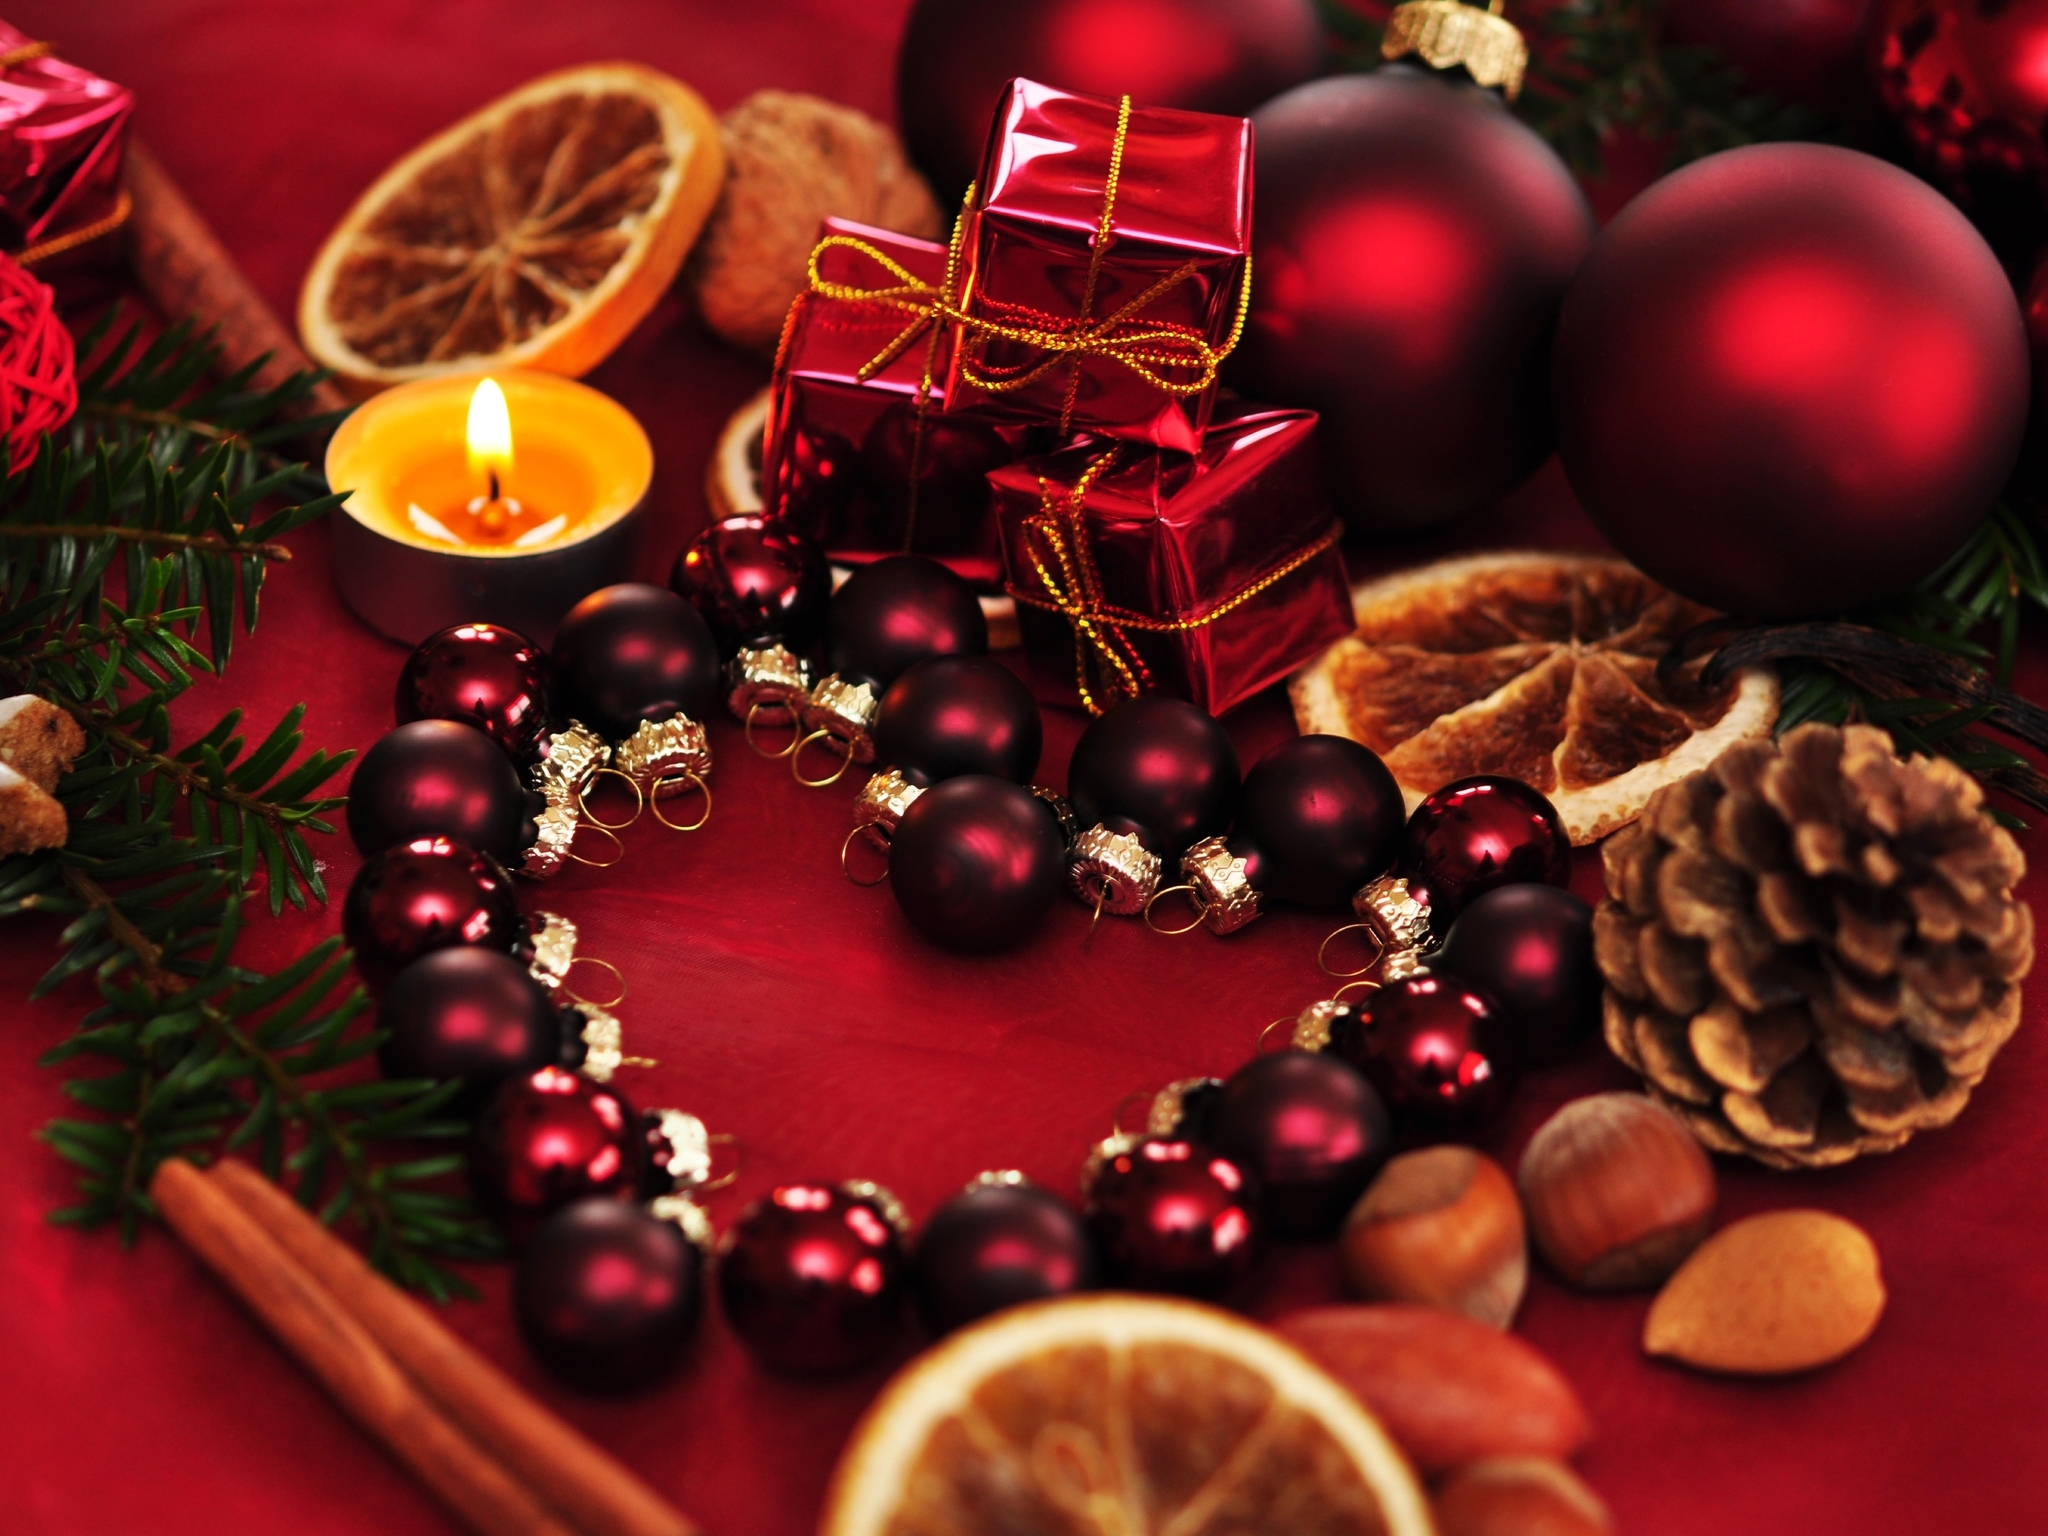 Image: Decor, Christmas balloons, heart, candles, nuts, cinnamon, bump, new year, red background